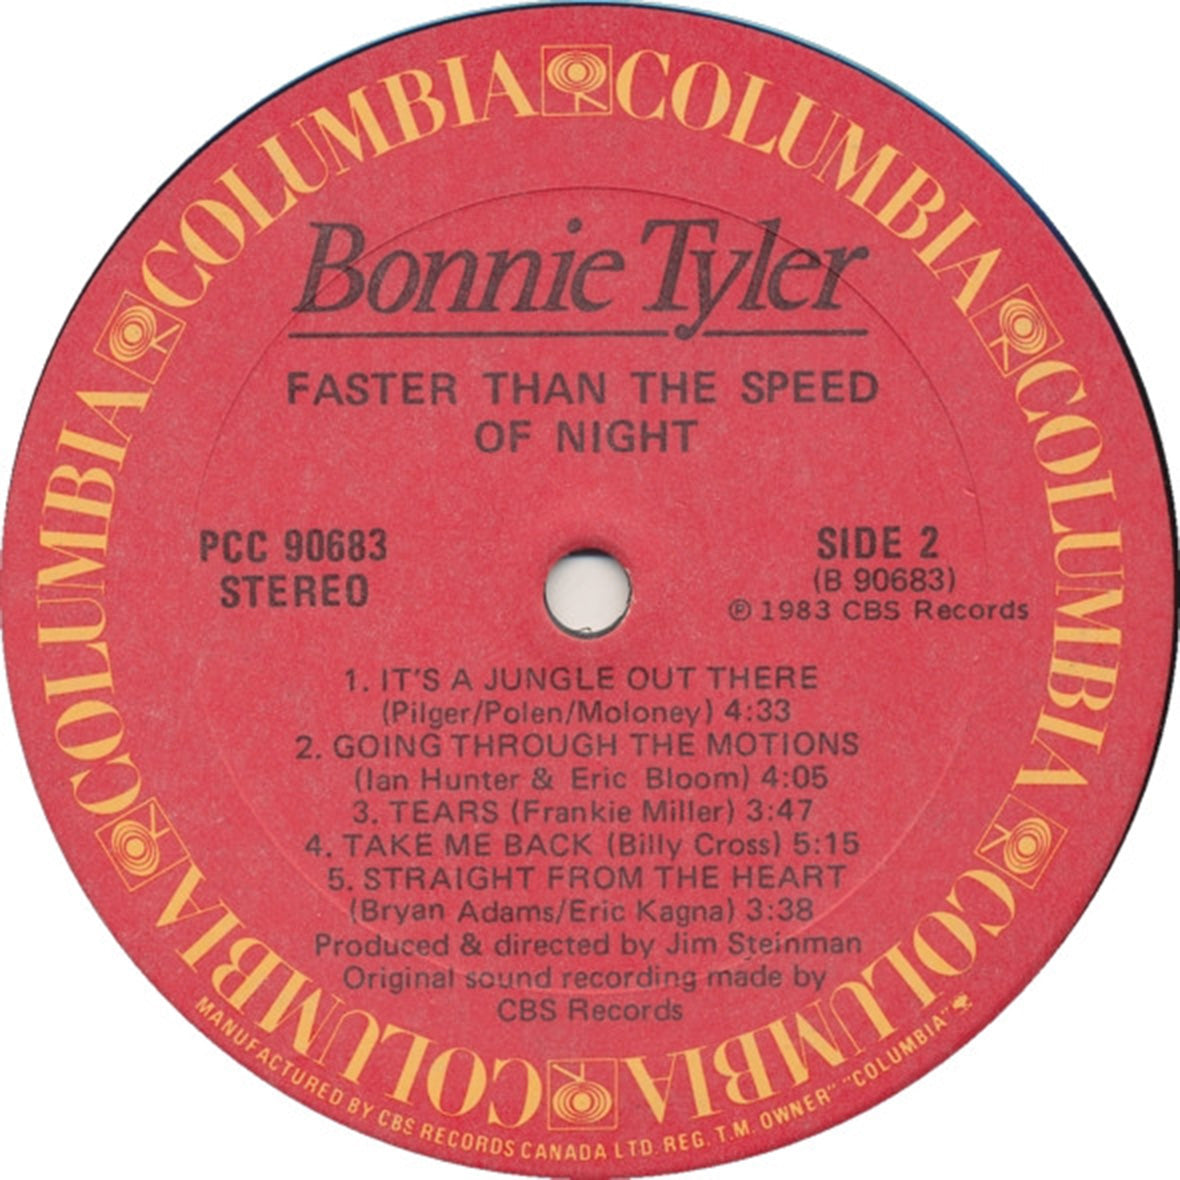 Bonnie Tyler – Faster Than The Speed Of Night - 1983